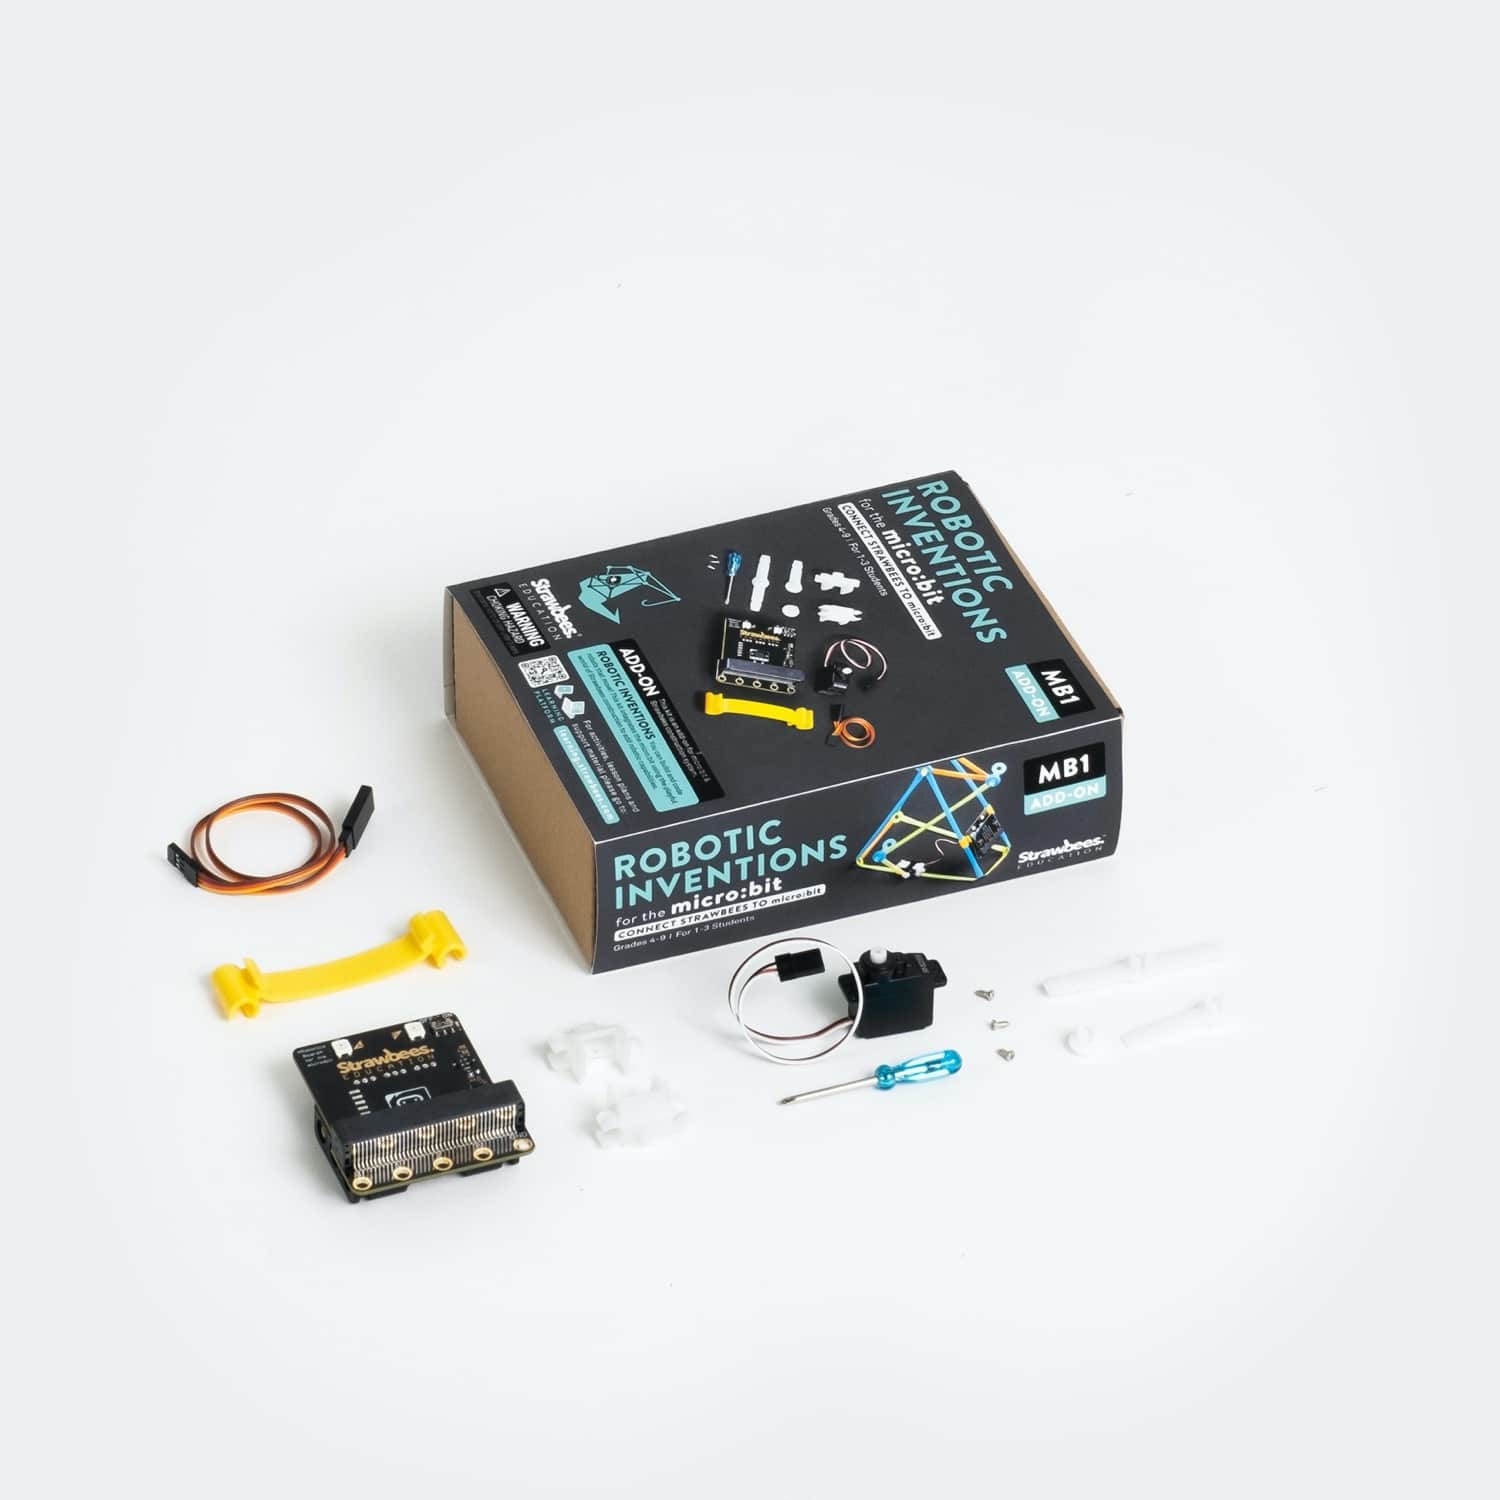 Strawbees robotic inventions for micro:bit - single pack